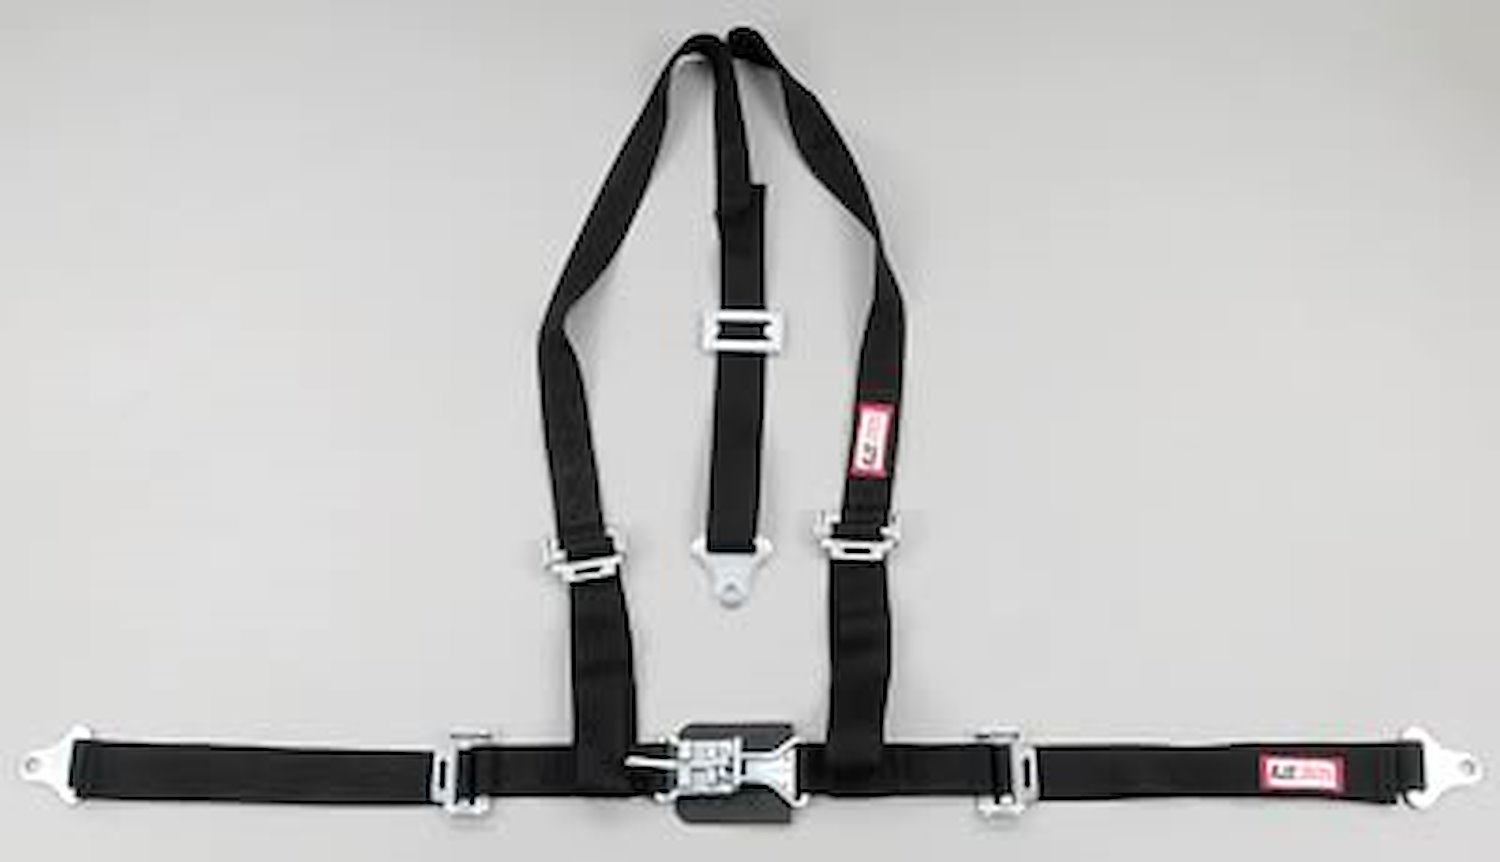 NON-SFI L&L HARNESS 2 PULL UP Lap Belt w/Adjuster SNAP 2 S.H. Individual FLOOR MOUNT w/STERNUM STRAP WRAP/SNAP YELLOW